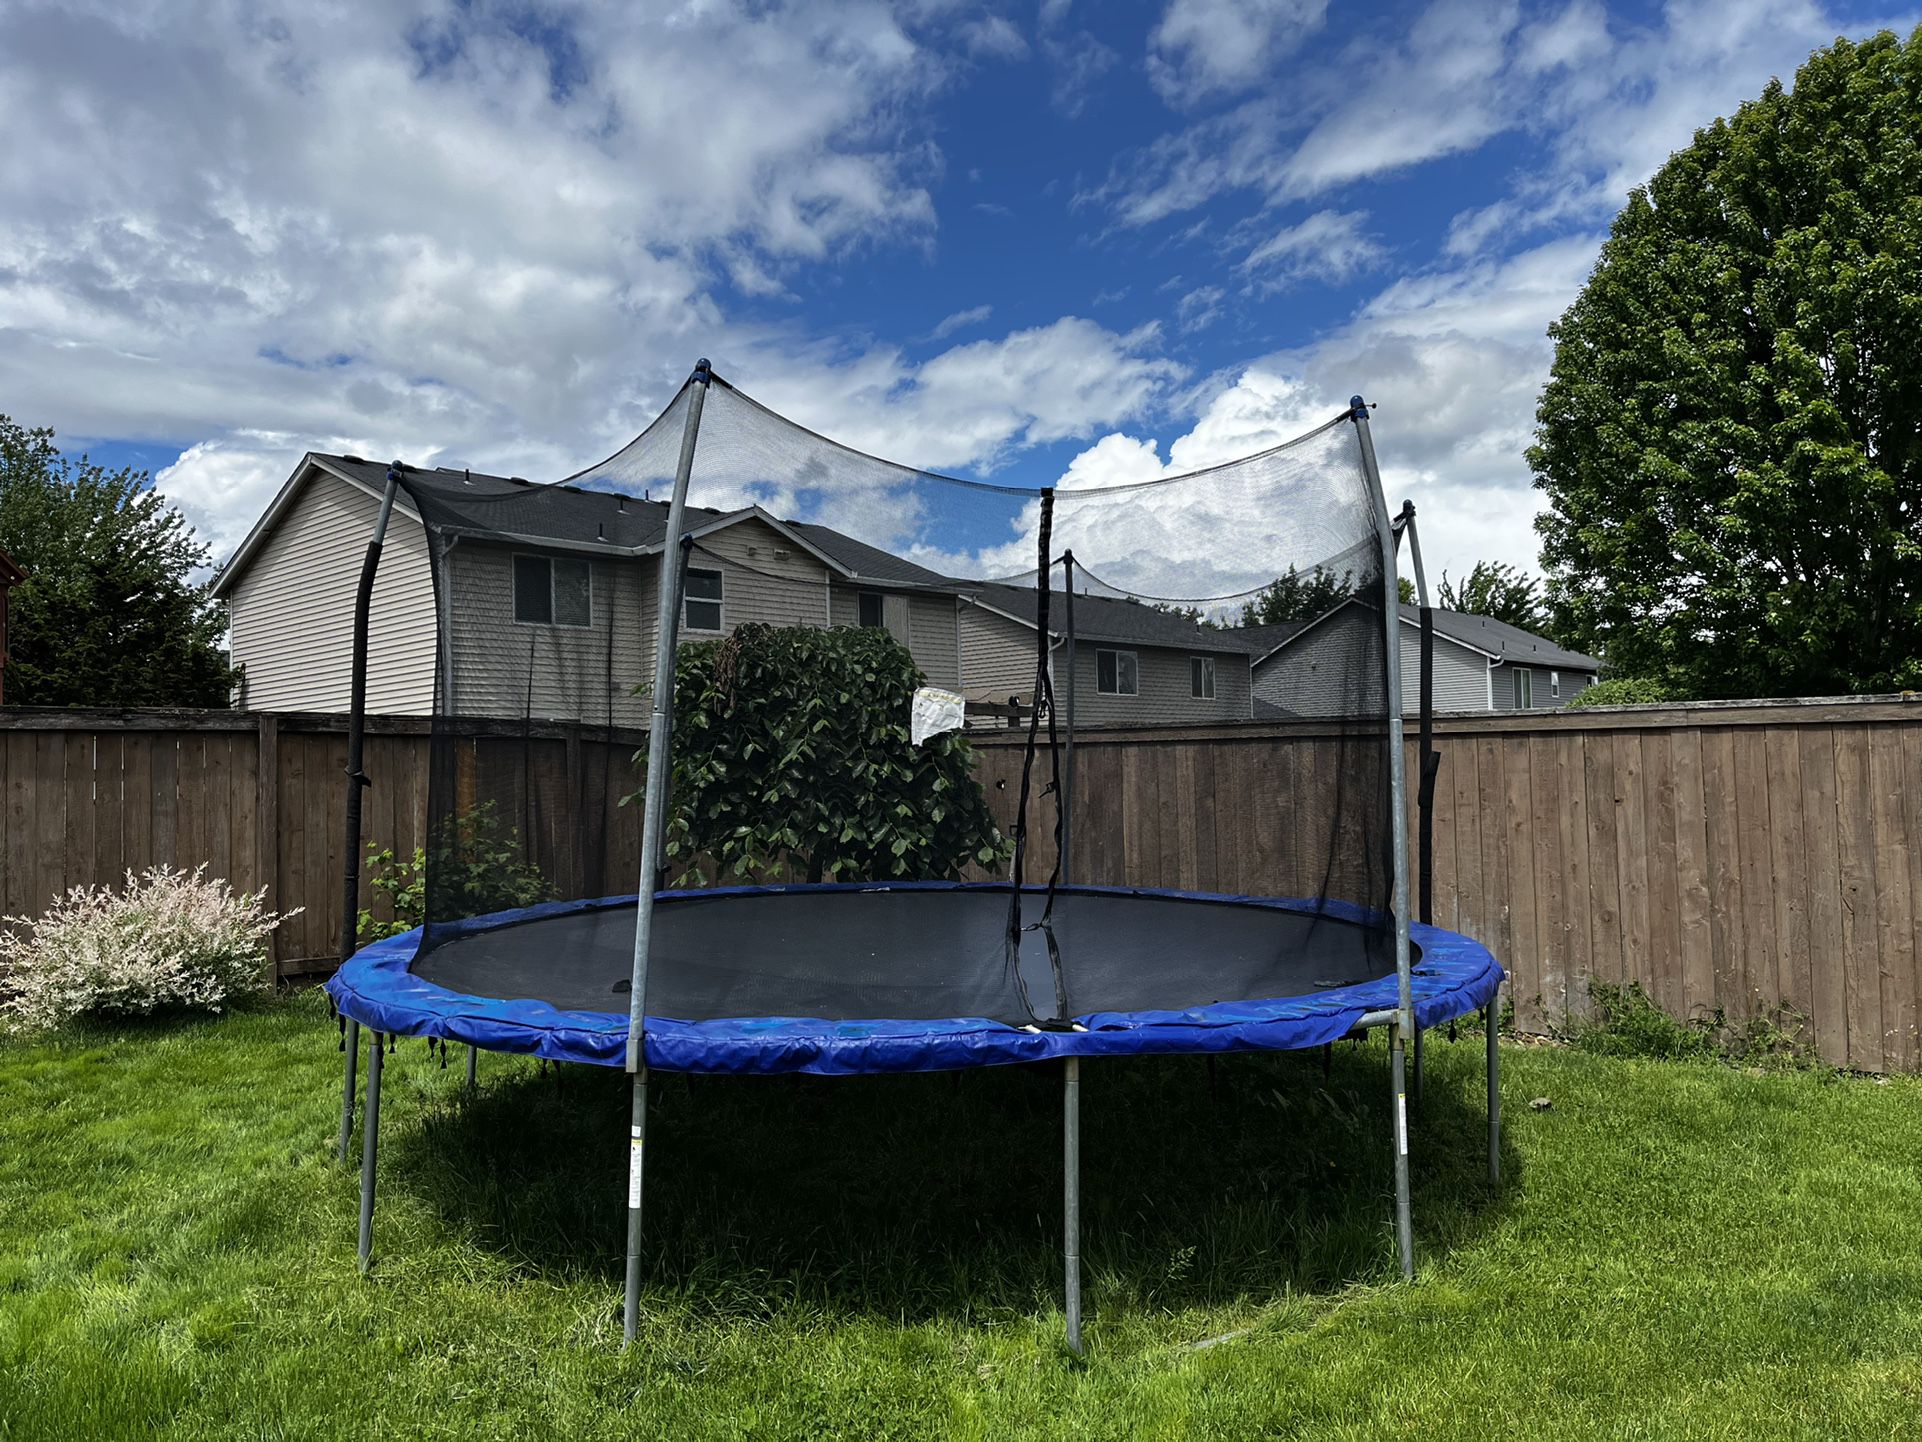 A 15 ft Skywalker Trampoline in a backyard under partially cloudy skies. 